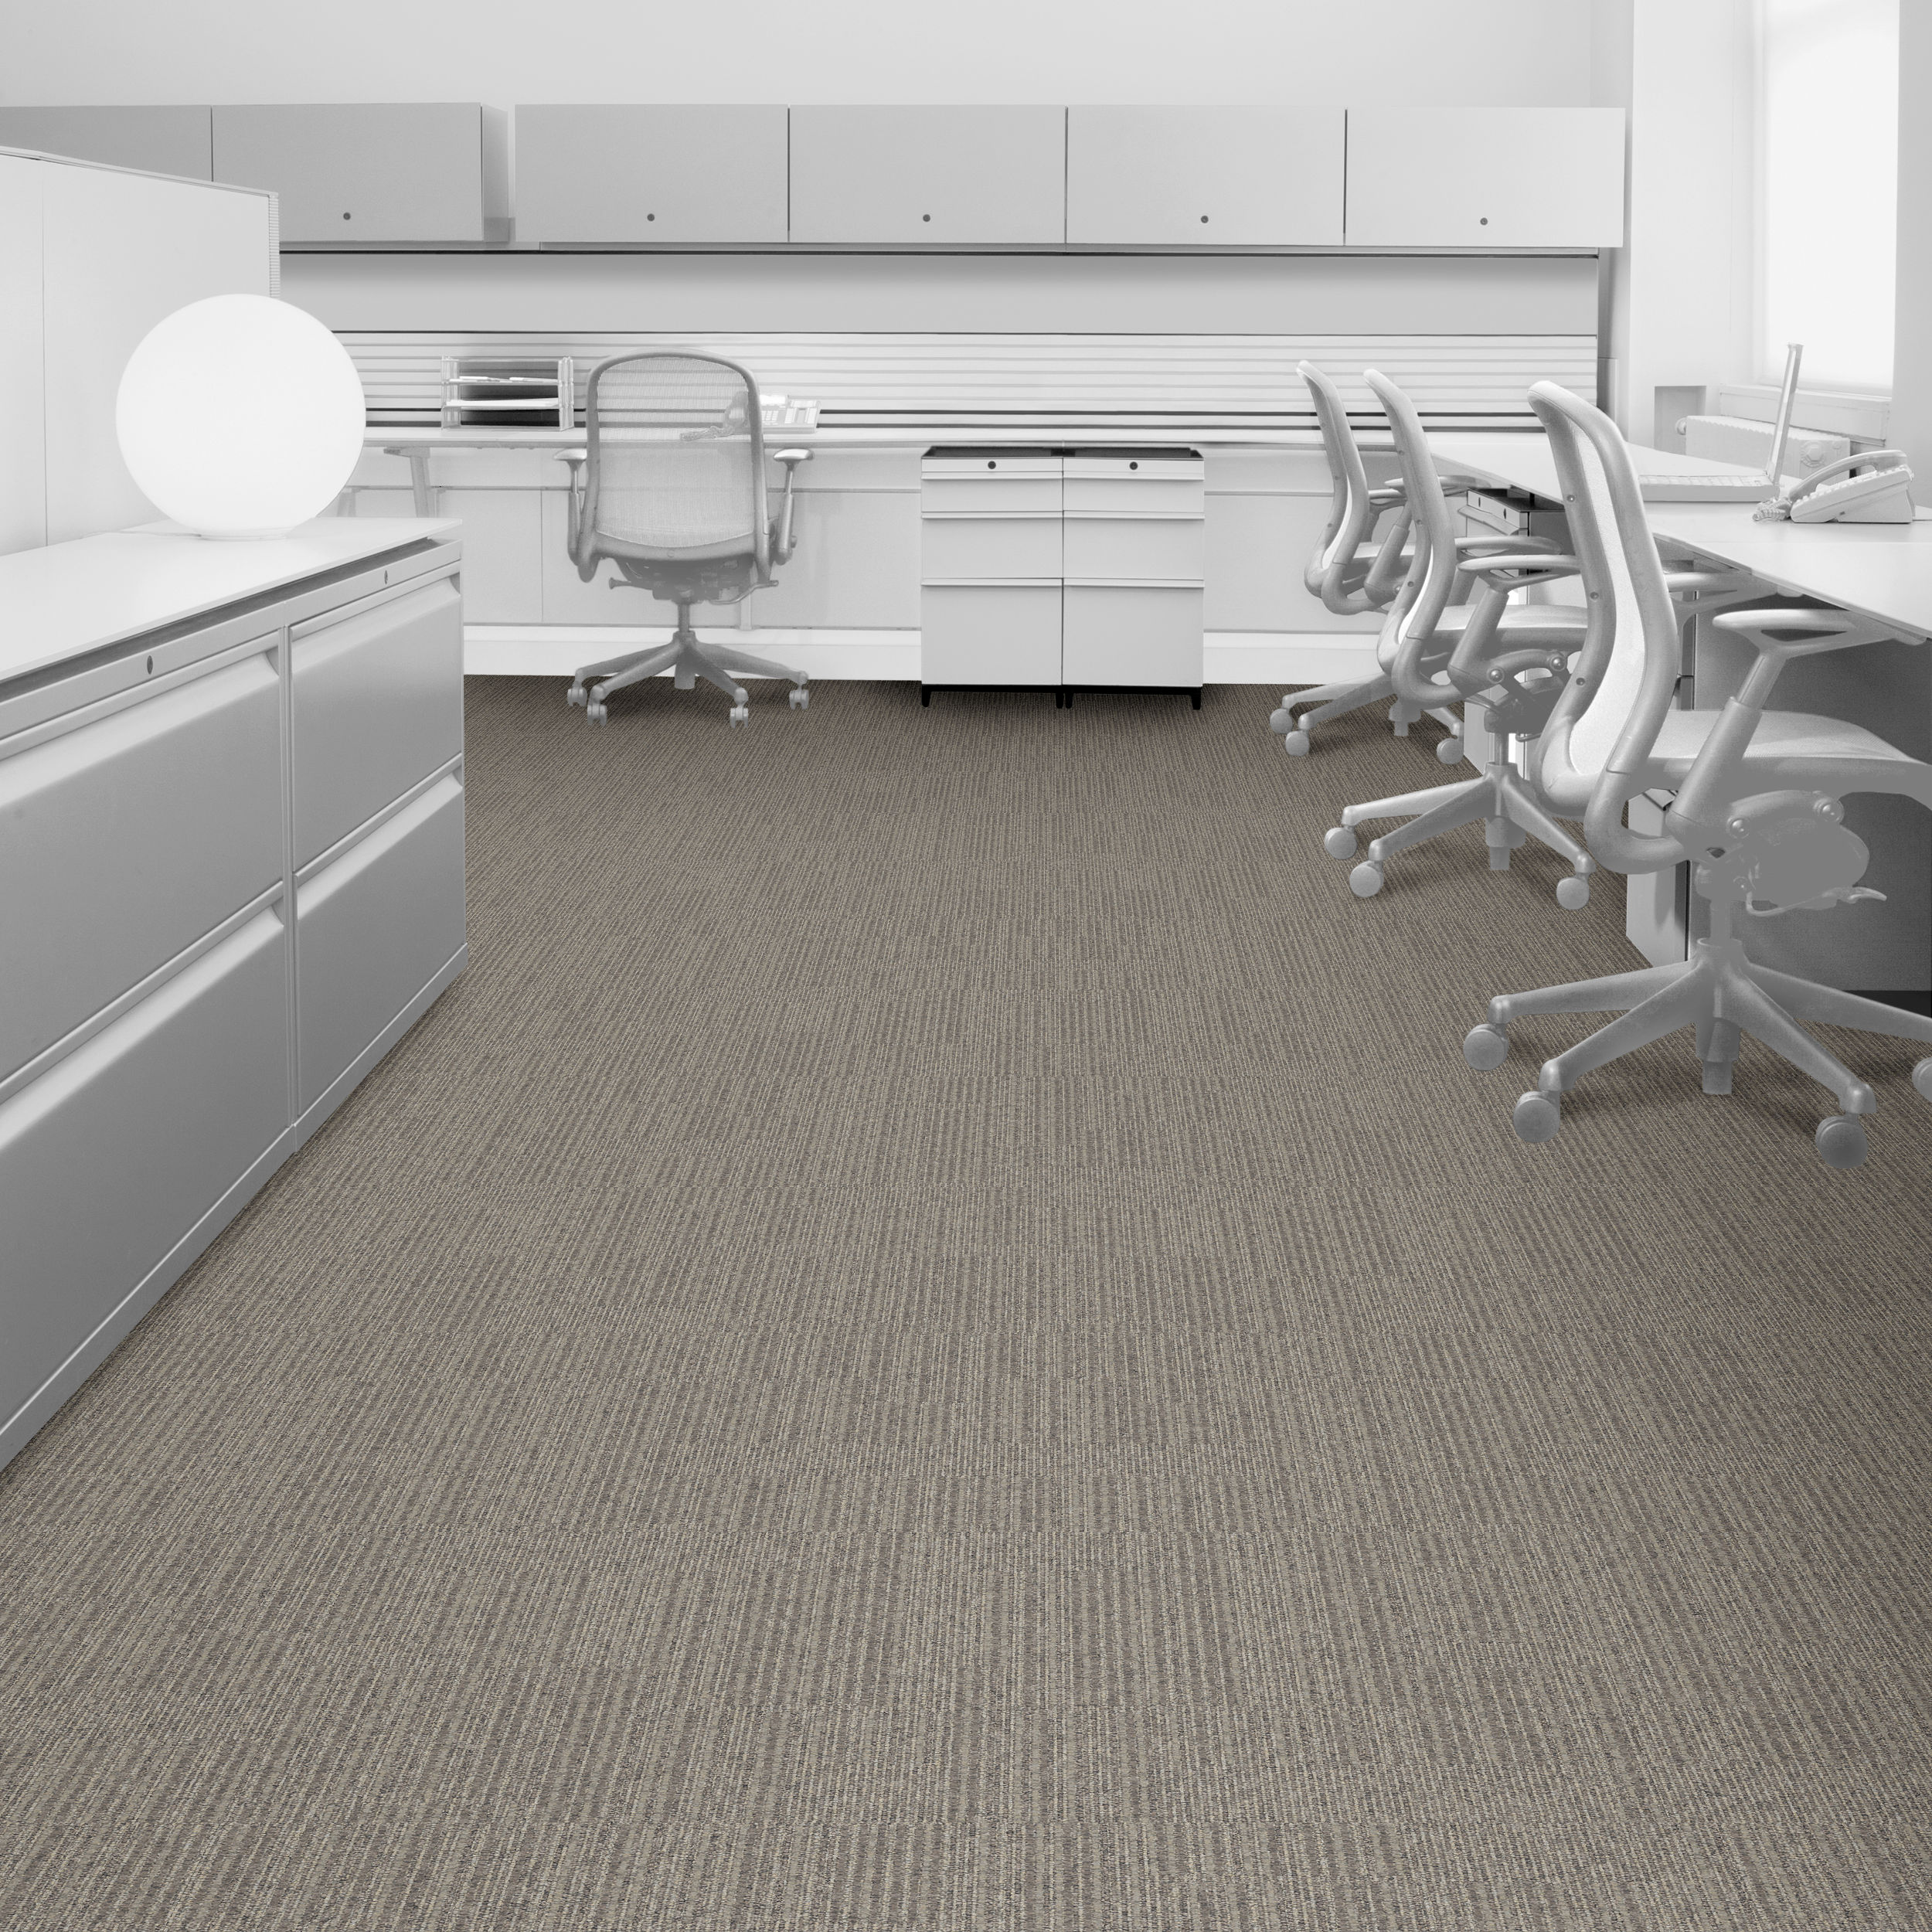 Interface Equilibrium Mobility Carpet Tile in office setting.